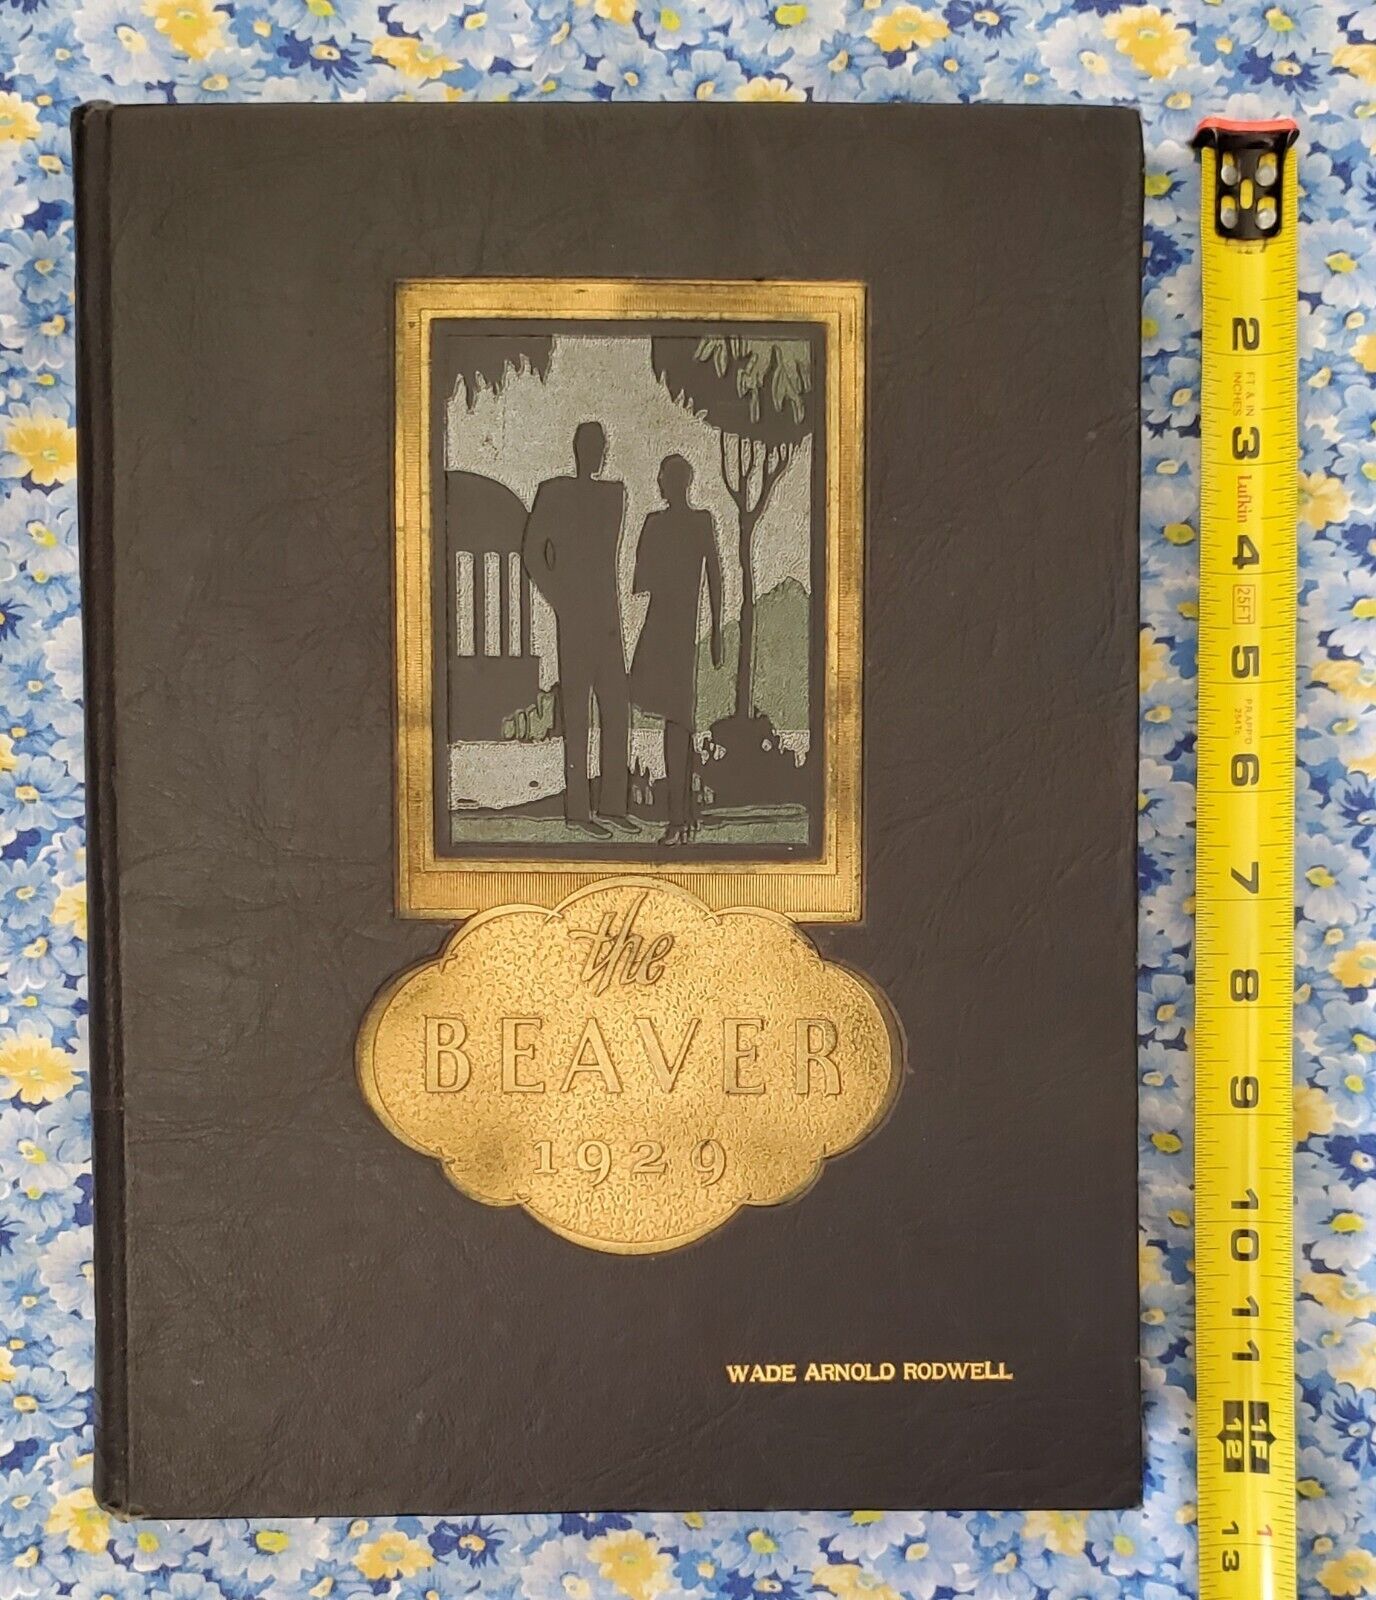 The Beaver Yearbook, Oregon State Collage, 1929 Hardcover